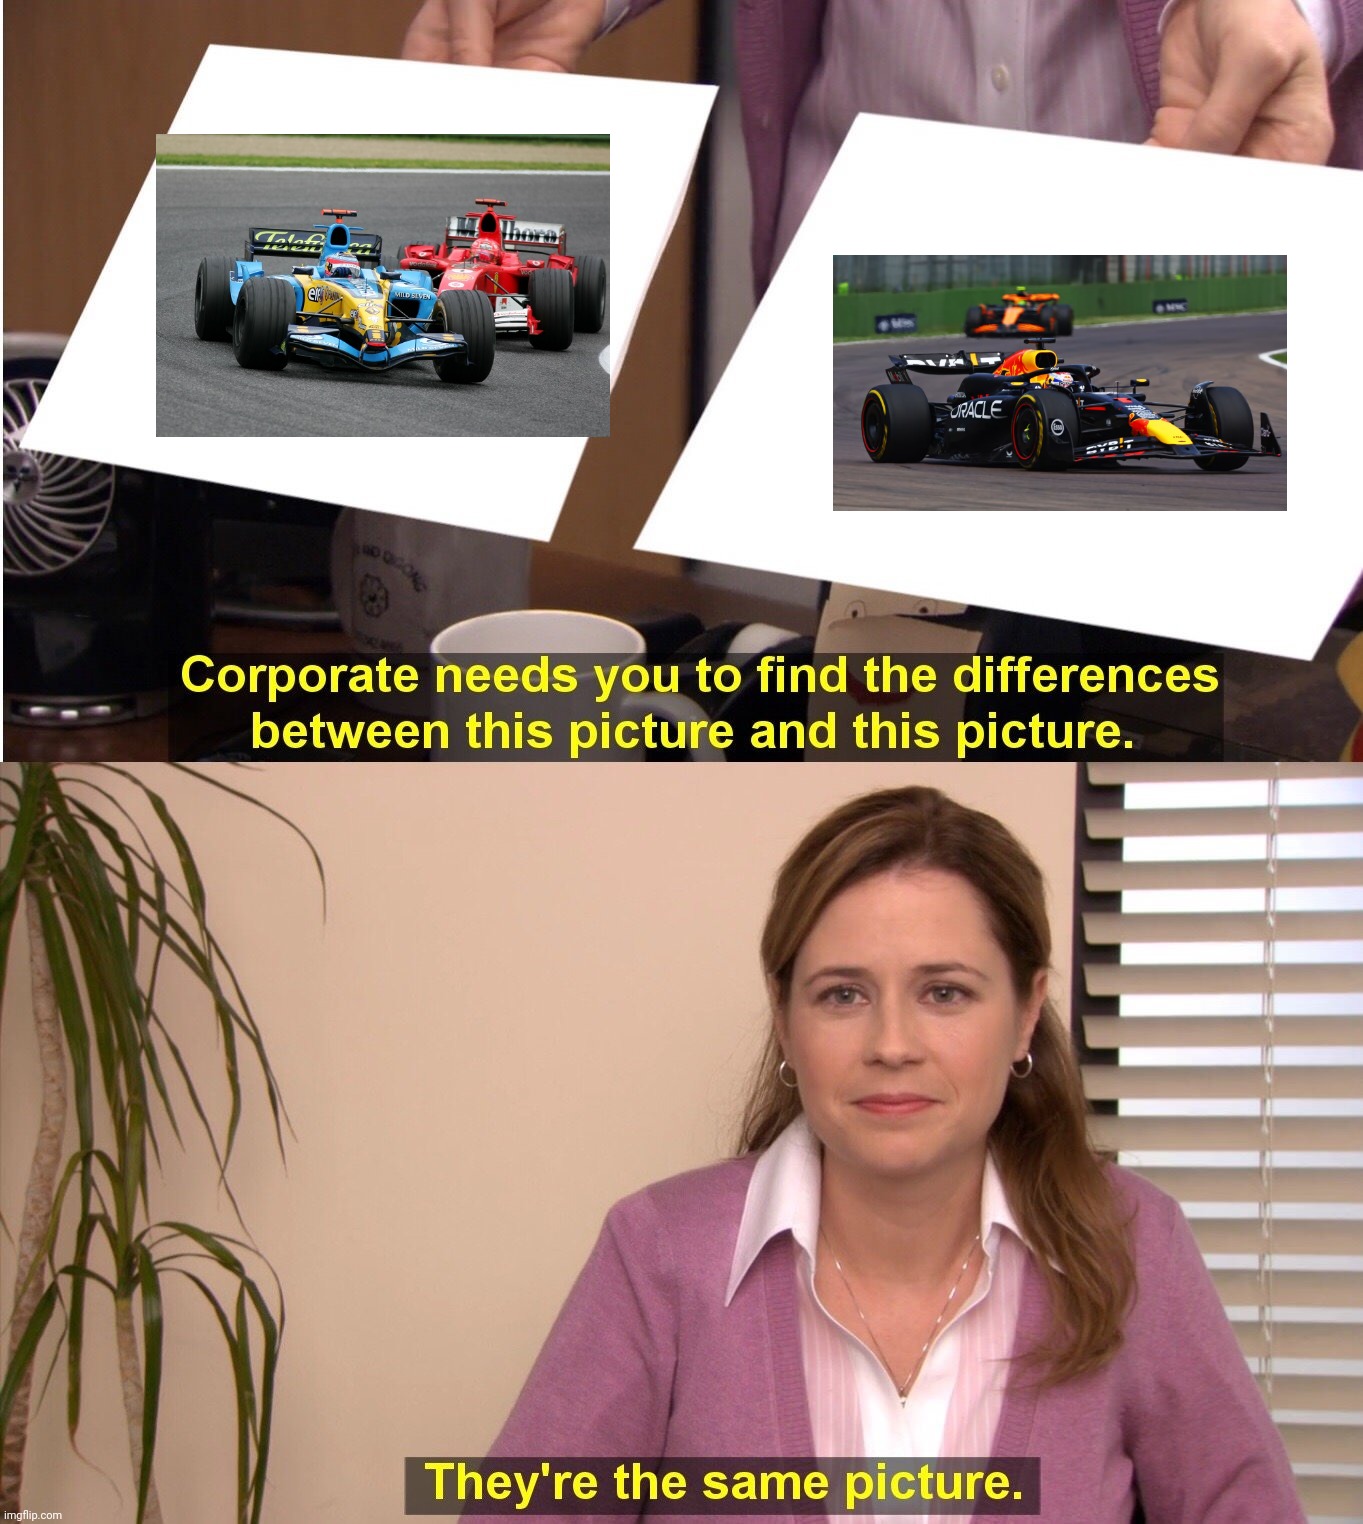 They're The Same Picture | image tagged in memes,they're the same picture,ferrari,formula 1,red bull,italy | made w/ Imgflip meme maker